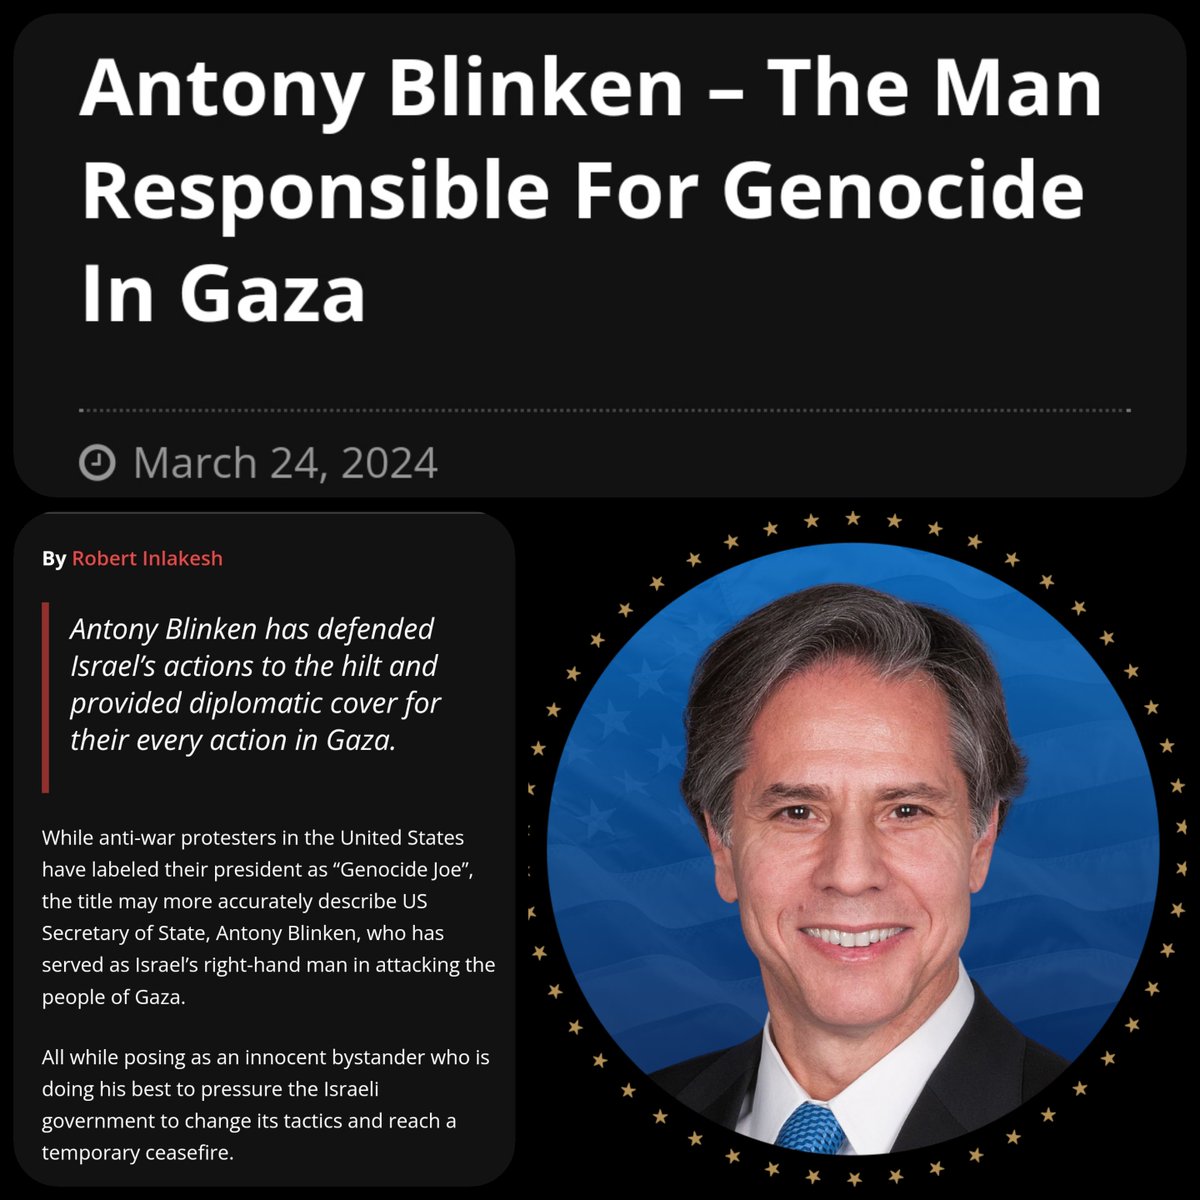 This is Antony Blinken's Genocide ● Blinken set a policy for a Genocide ● Blinken protects Israel's ability to do Genocide for 7 months ● Blinken's UN Ambassadors 5 times blocked ceasefires to stop a Genocide ● Blinken says he's not doing a Genocide when he absolutely is!